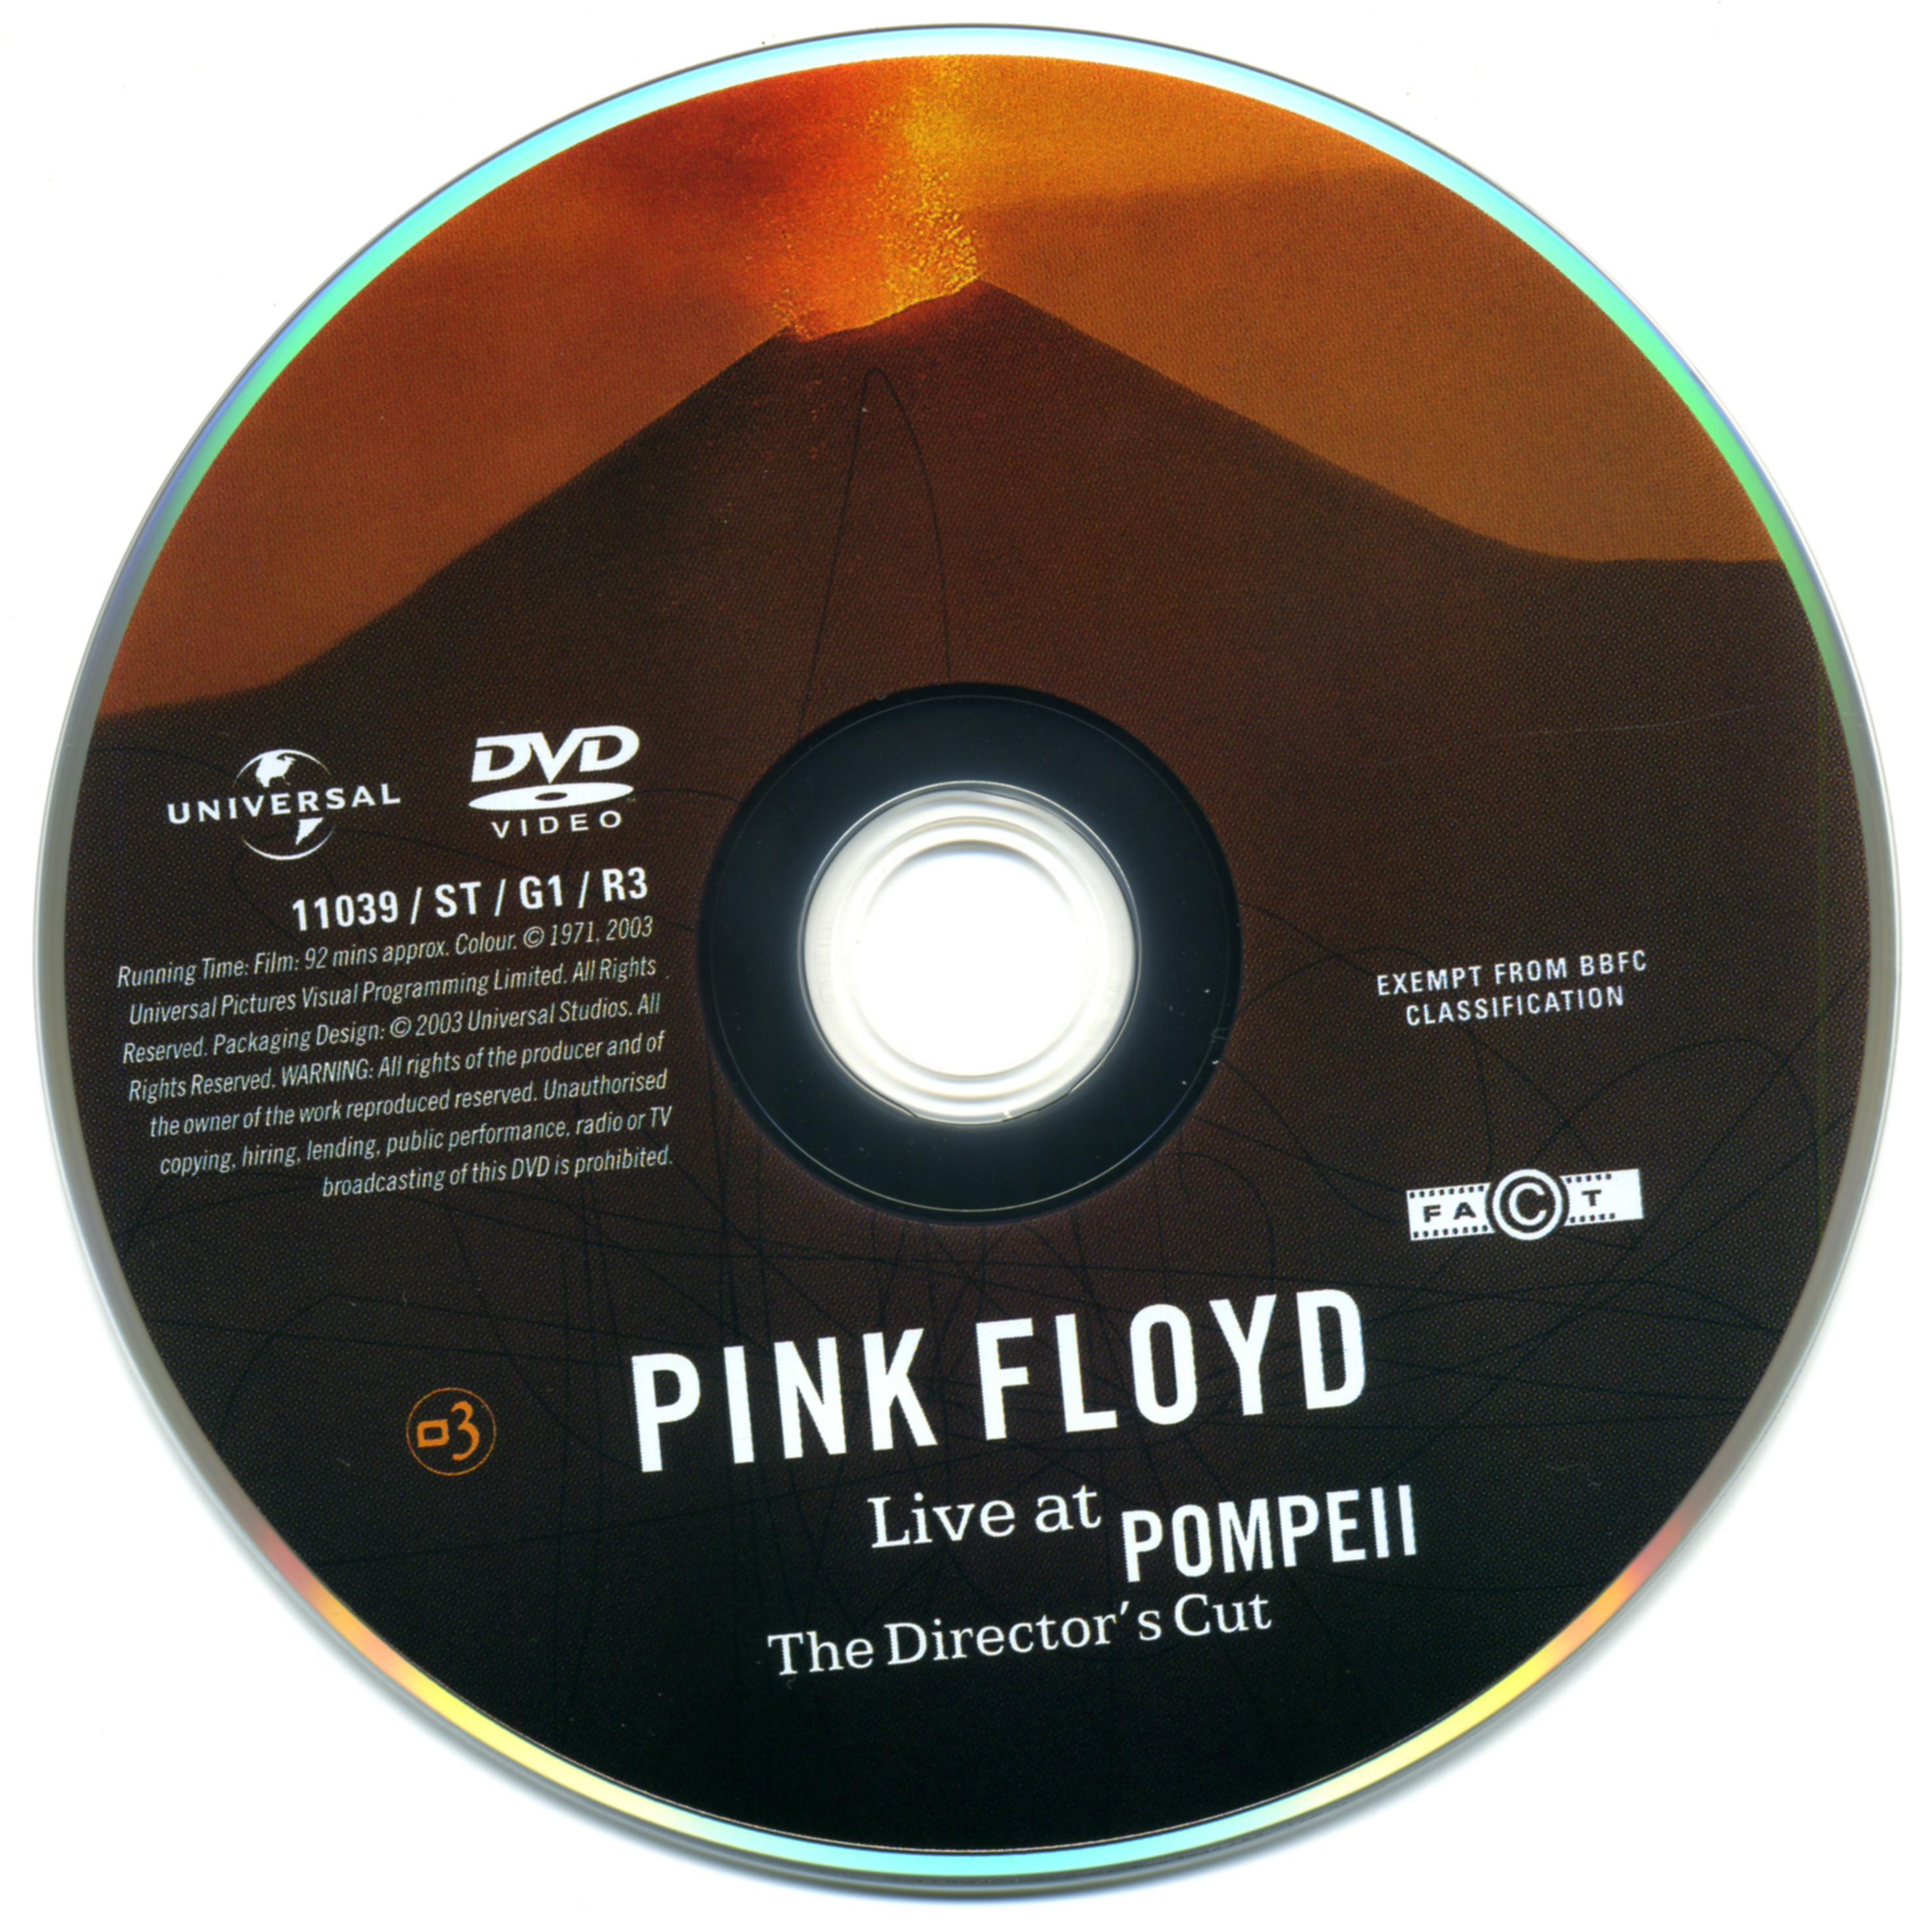 Pink Floyd Live at pompei